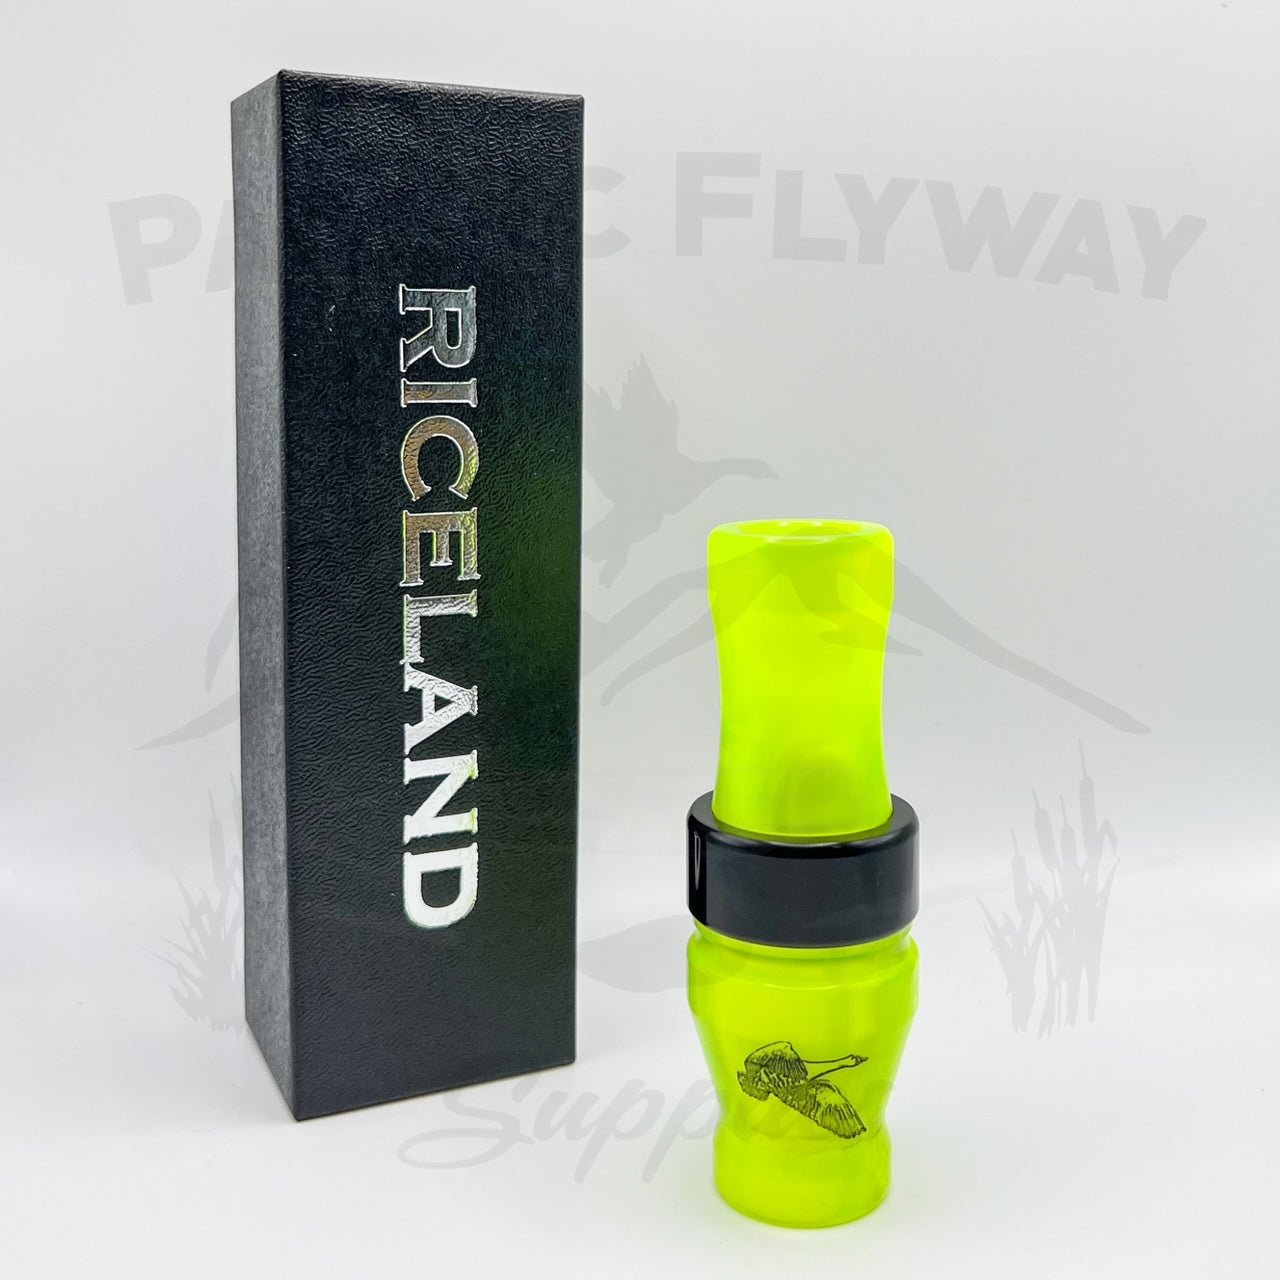 Riceland Custom Calls Specklebelly Acrylic 3/4" Guts Special Edition Shortly Barrel Polished Chartreuse Pearl Black Band - Pacific Flyway Supplies